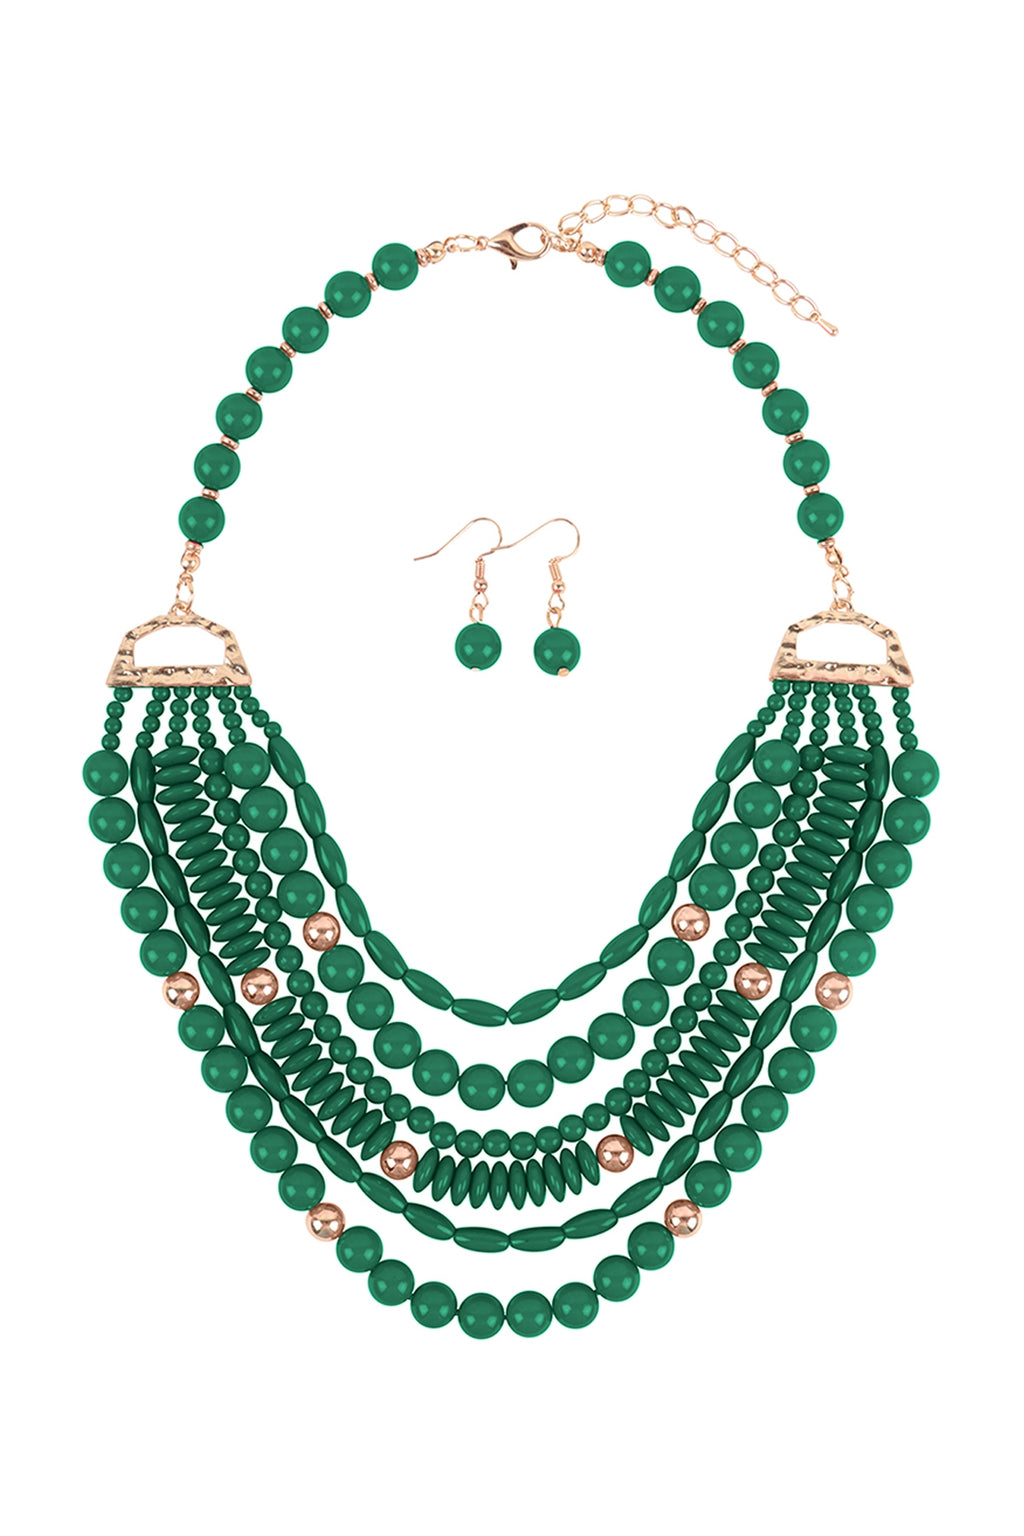 Layered Bib Bohemian Statement Necklace and Earrings Set Emerald - Pack of 6